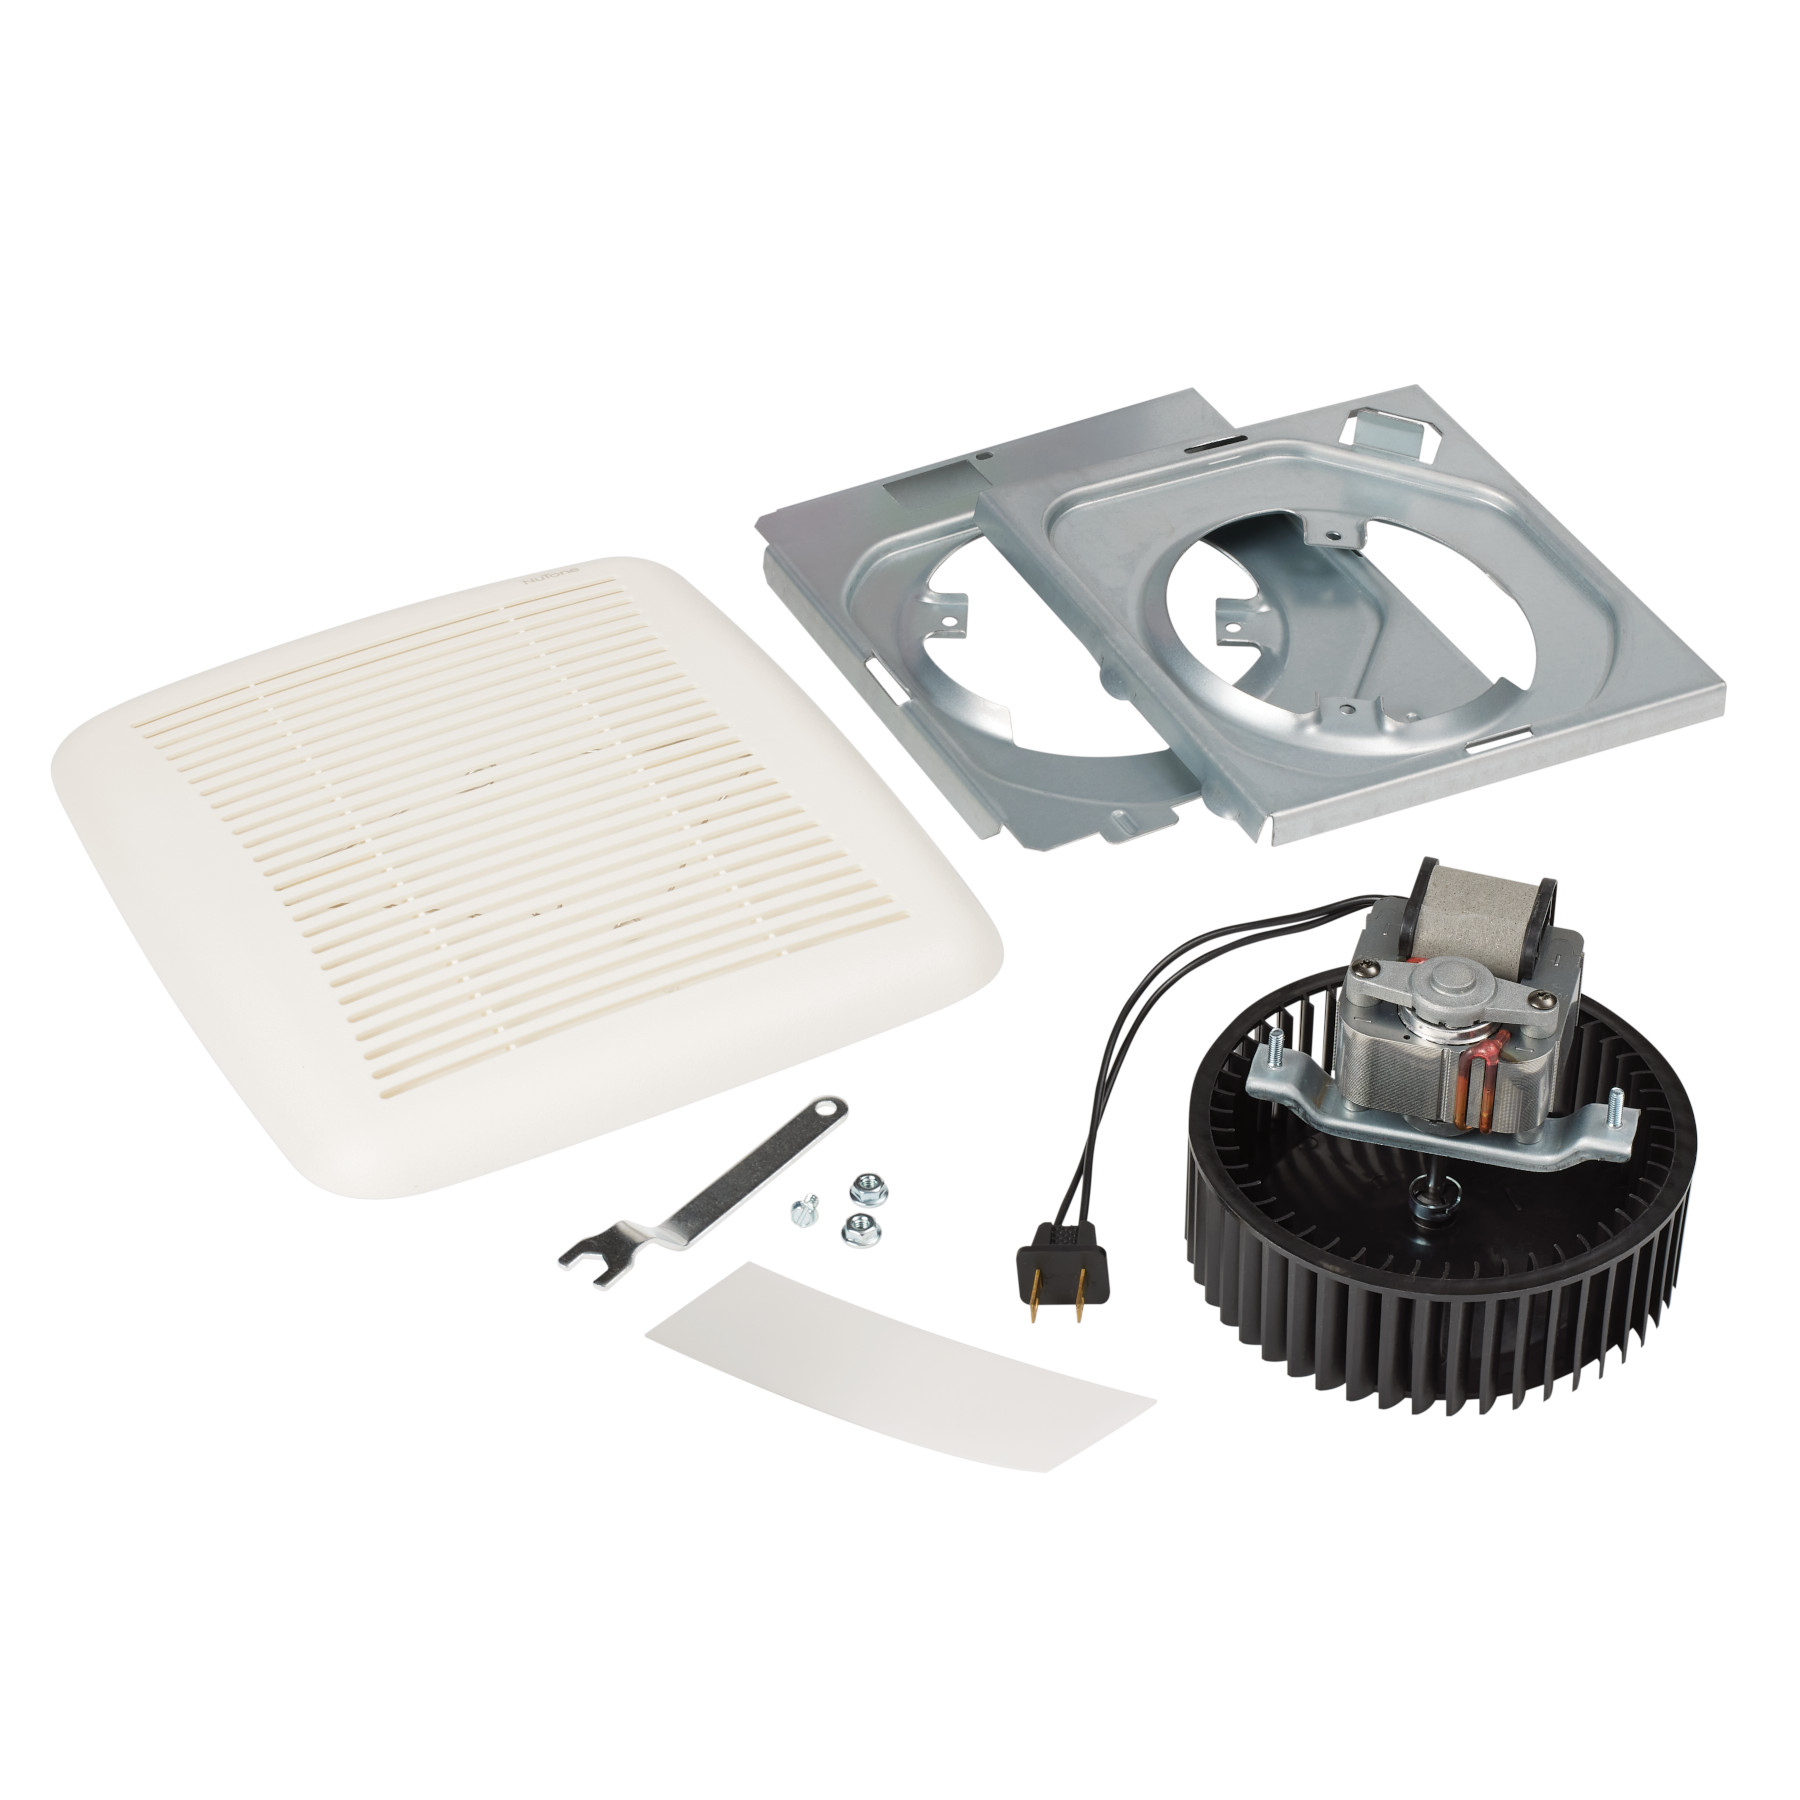 Broan-NuTone® QuicKit™ Bath Fan Replacement Motor and Cover/Grille, 60 CFM